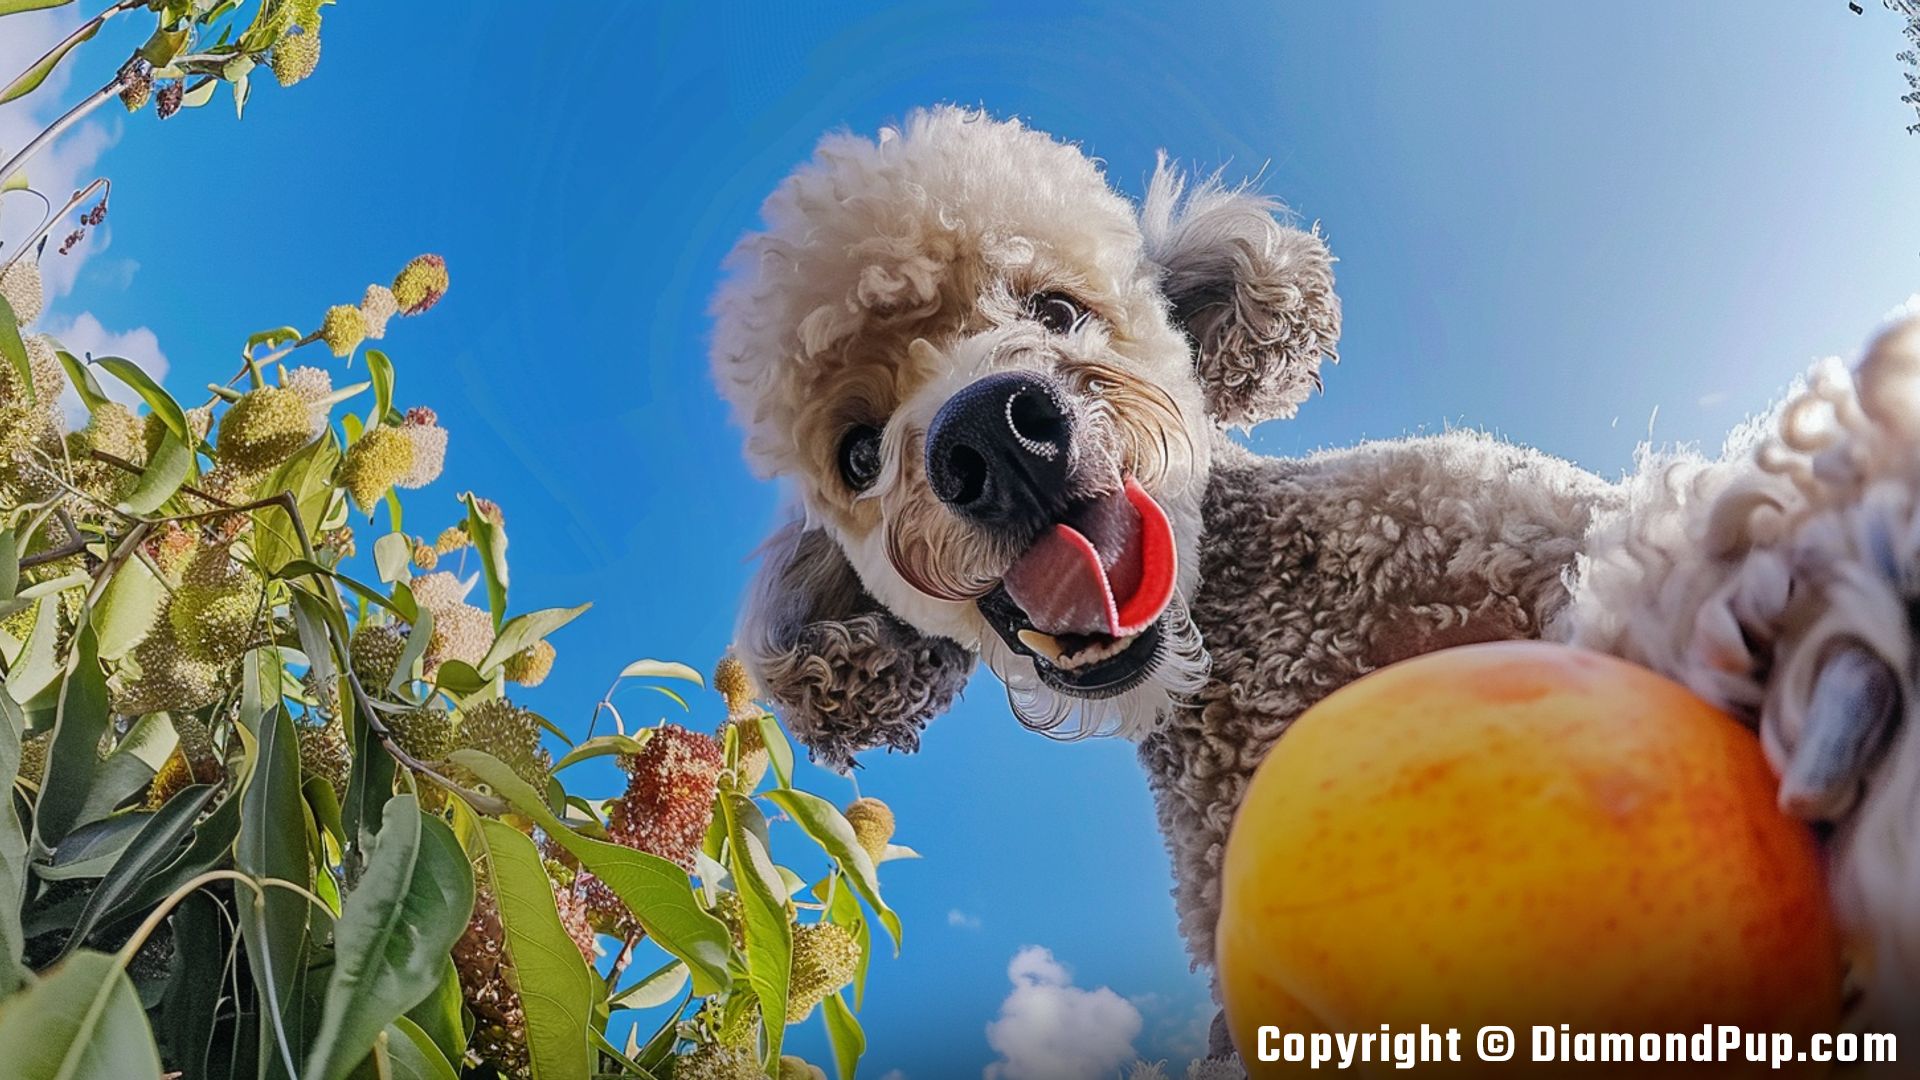 Photograph of an Adorable Poodle Snacking on Peaches